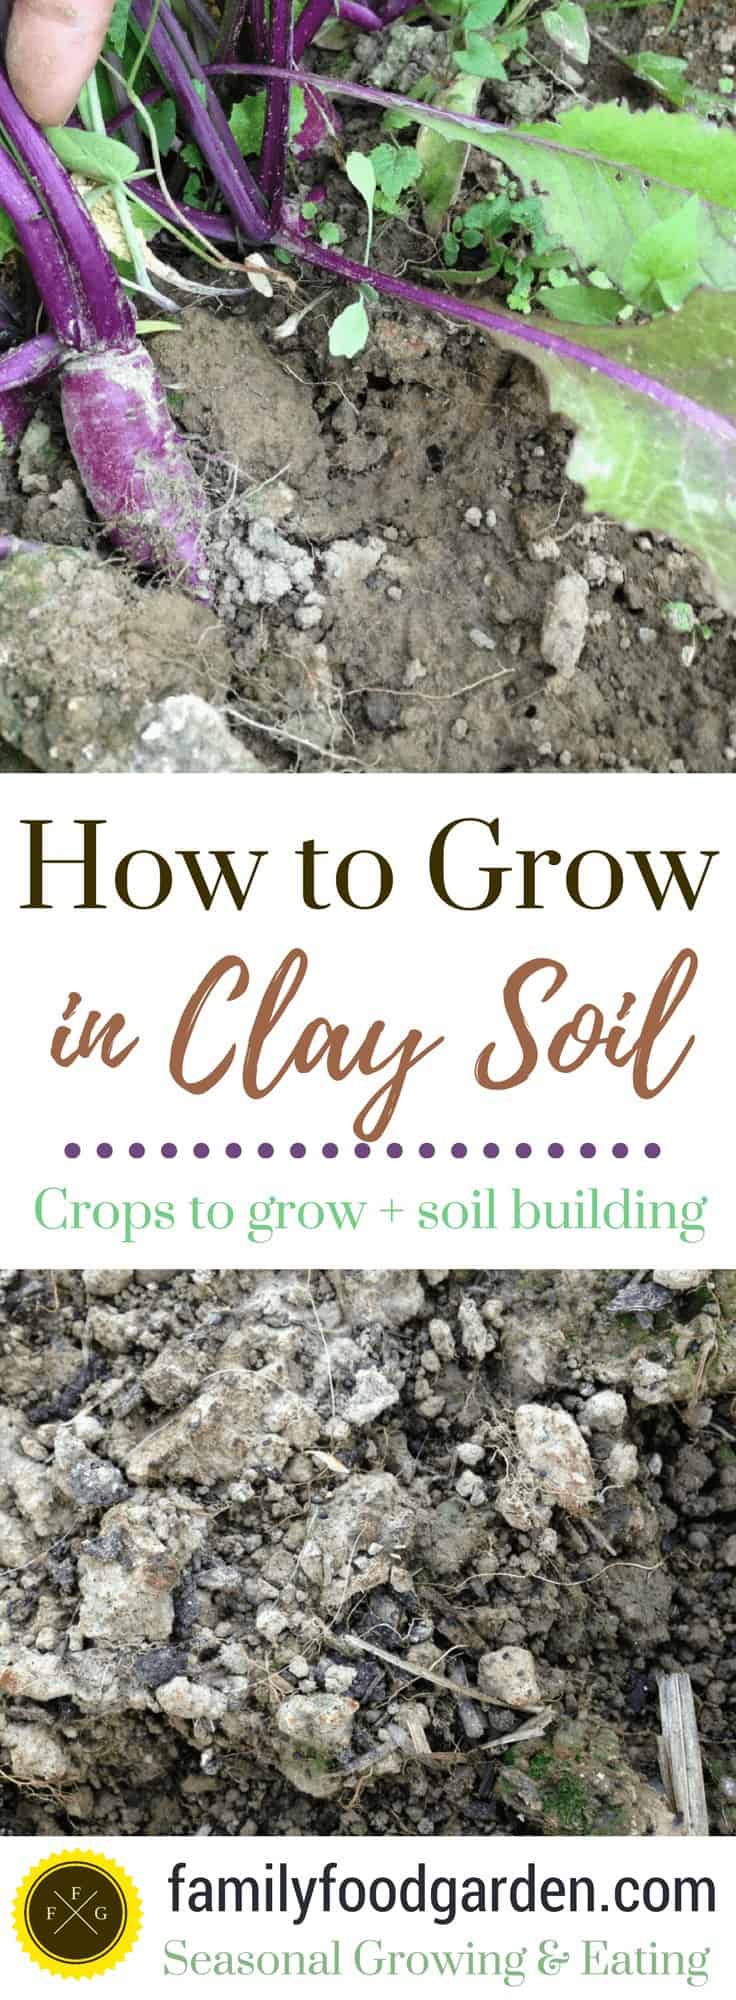 Gardening with Clay Soil + Best Vegetables for Clay Soil